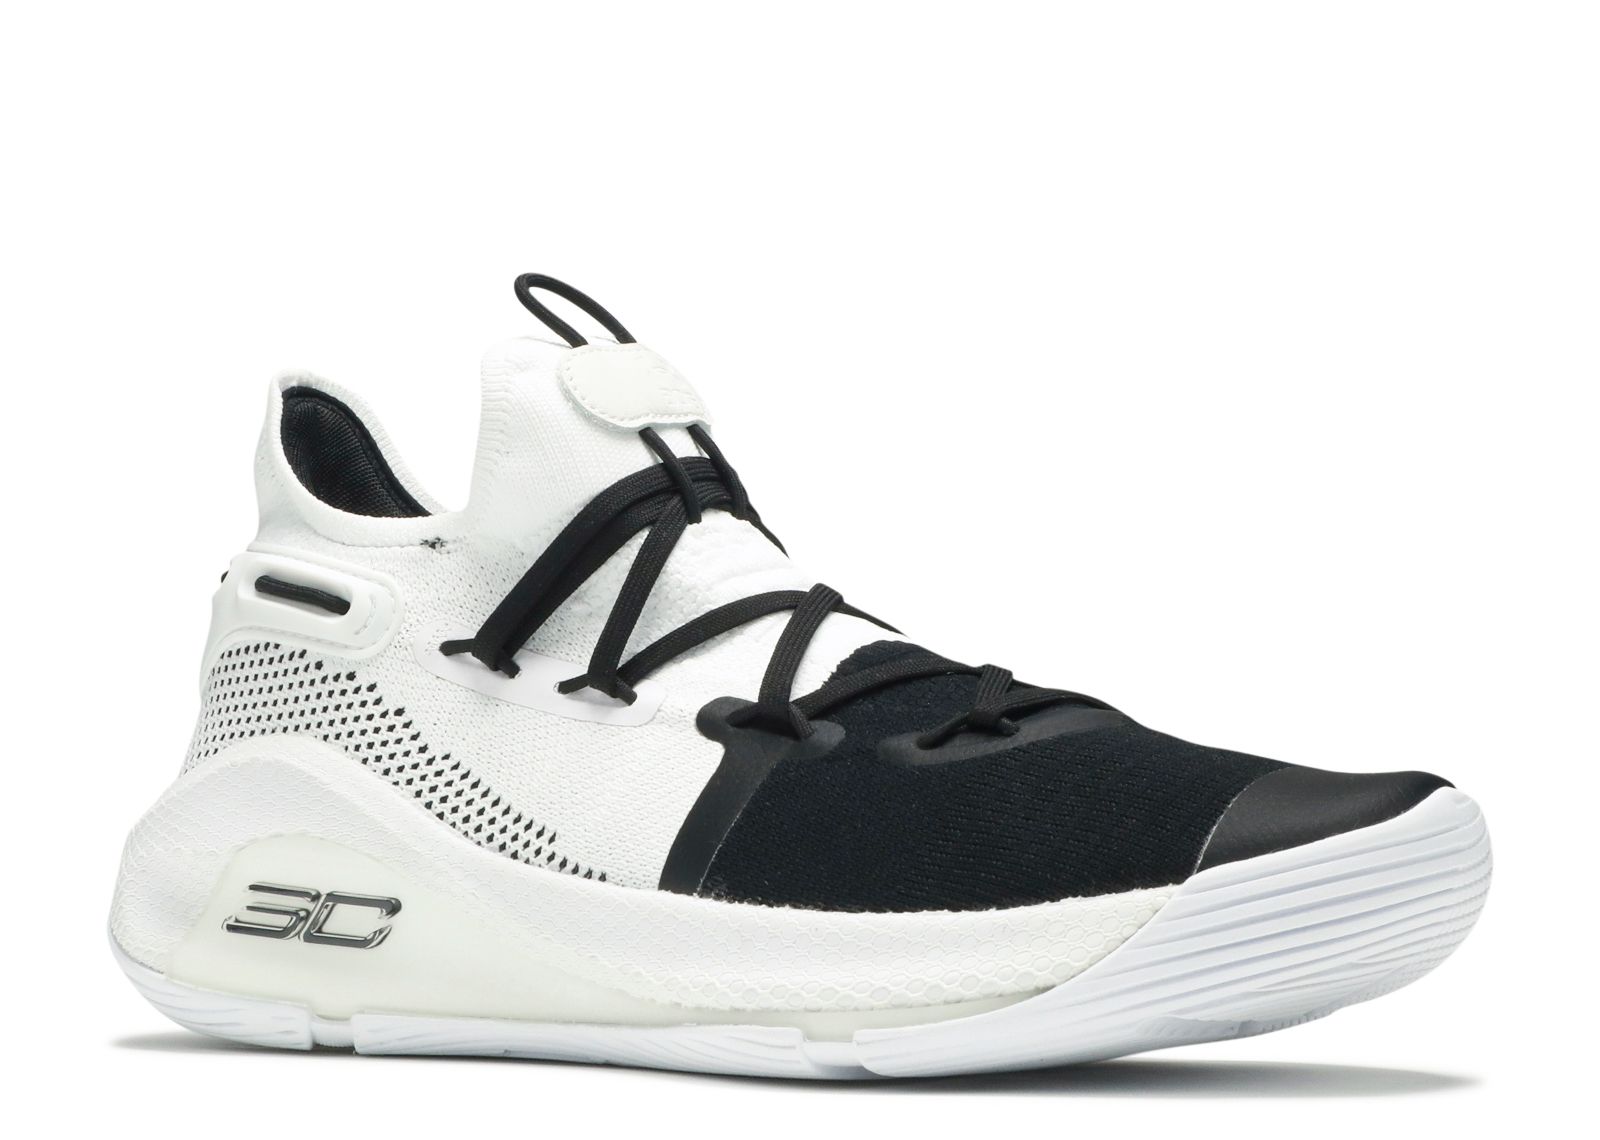 Mens Under Armour Curry 6 White Black Basketball Trainers 3020612-101 